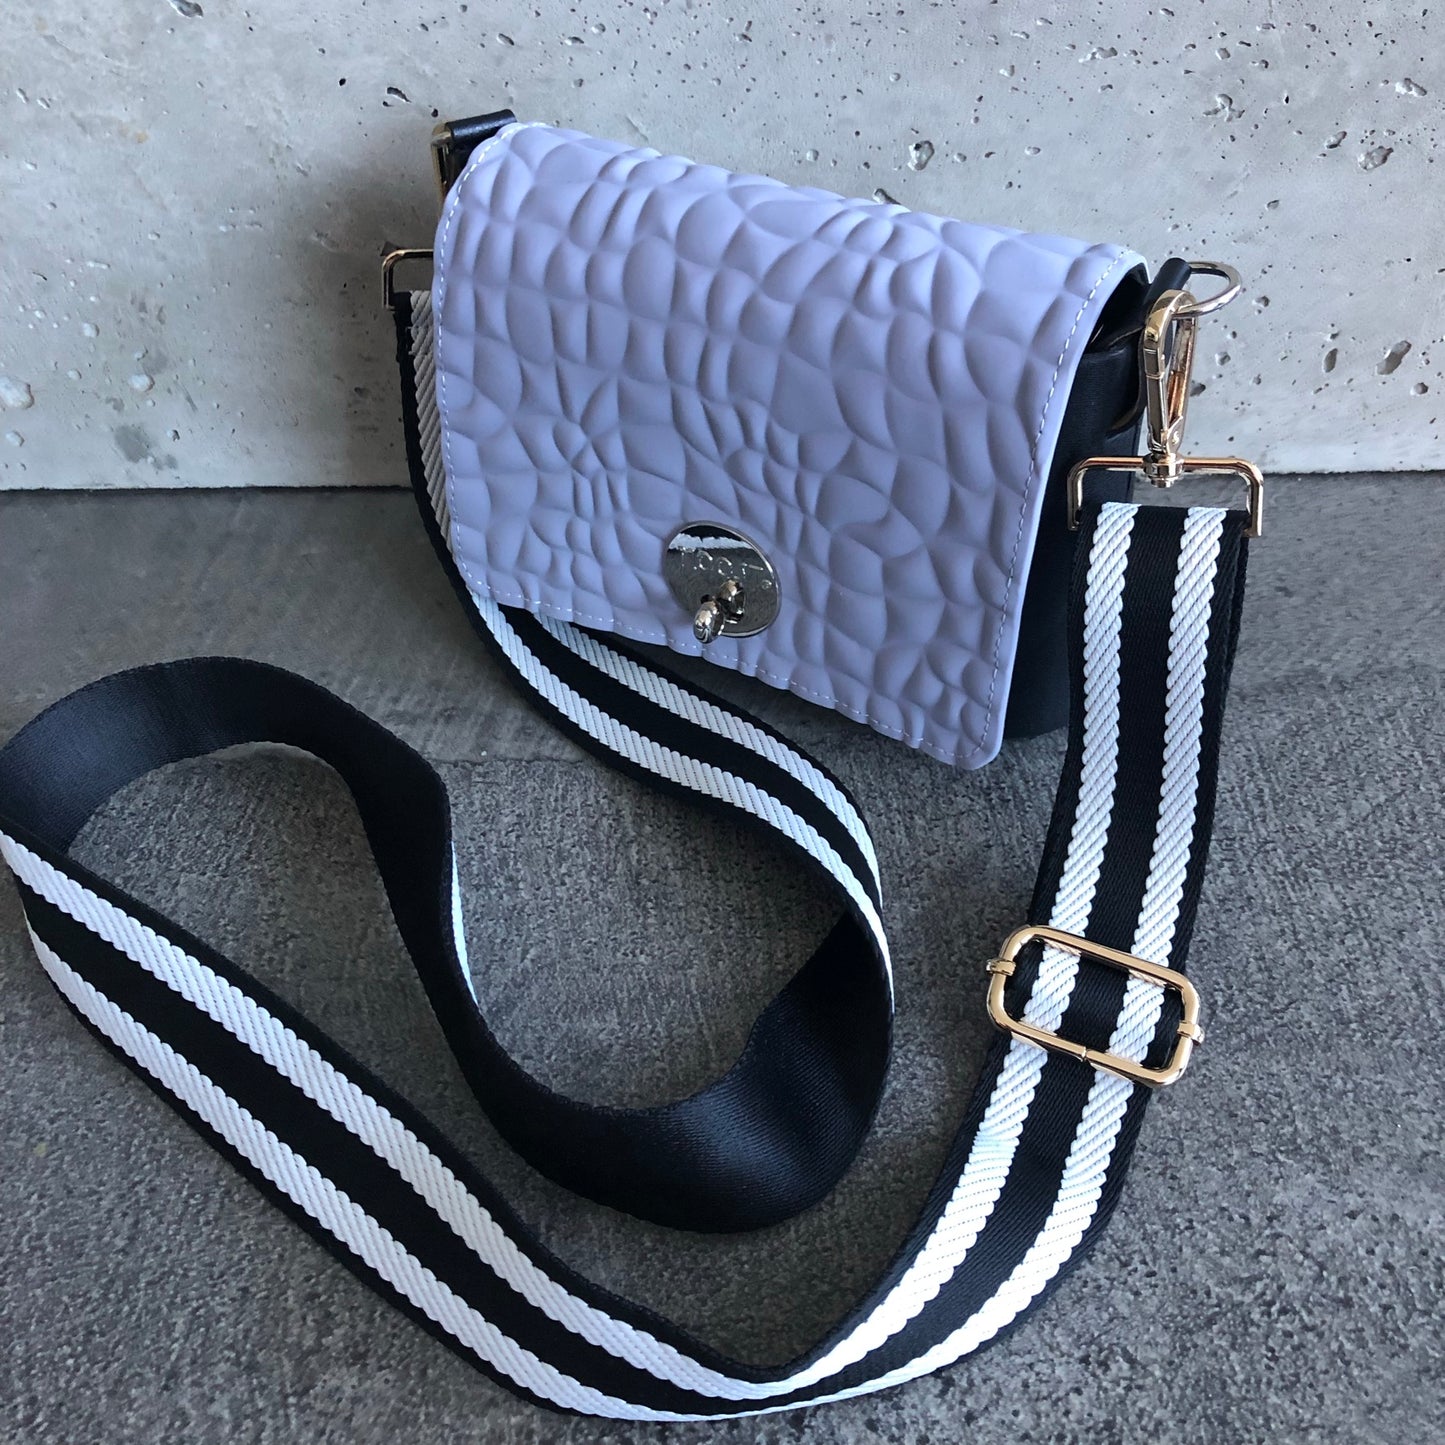 Periwinkle on Black with Stripe Strap